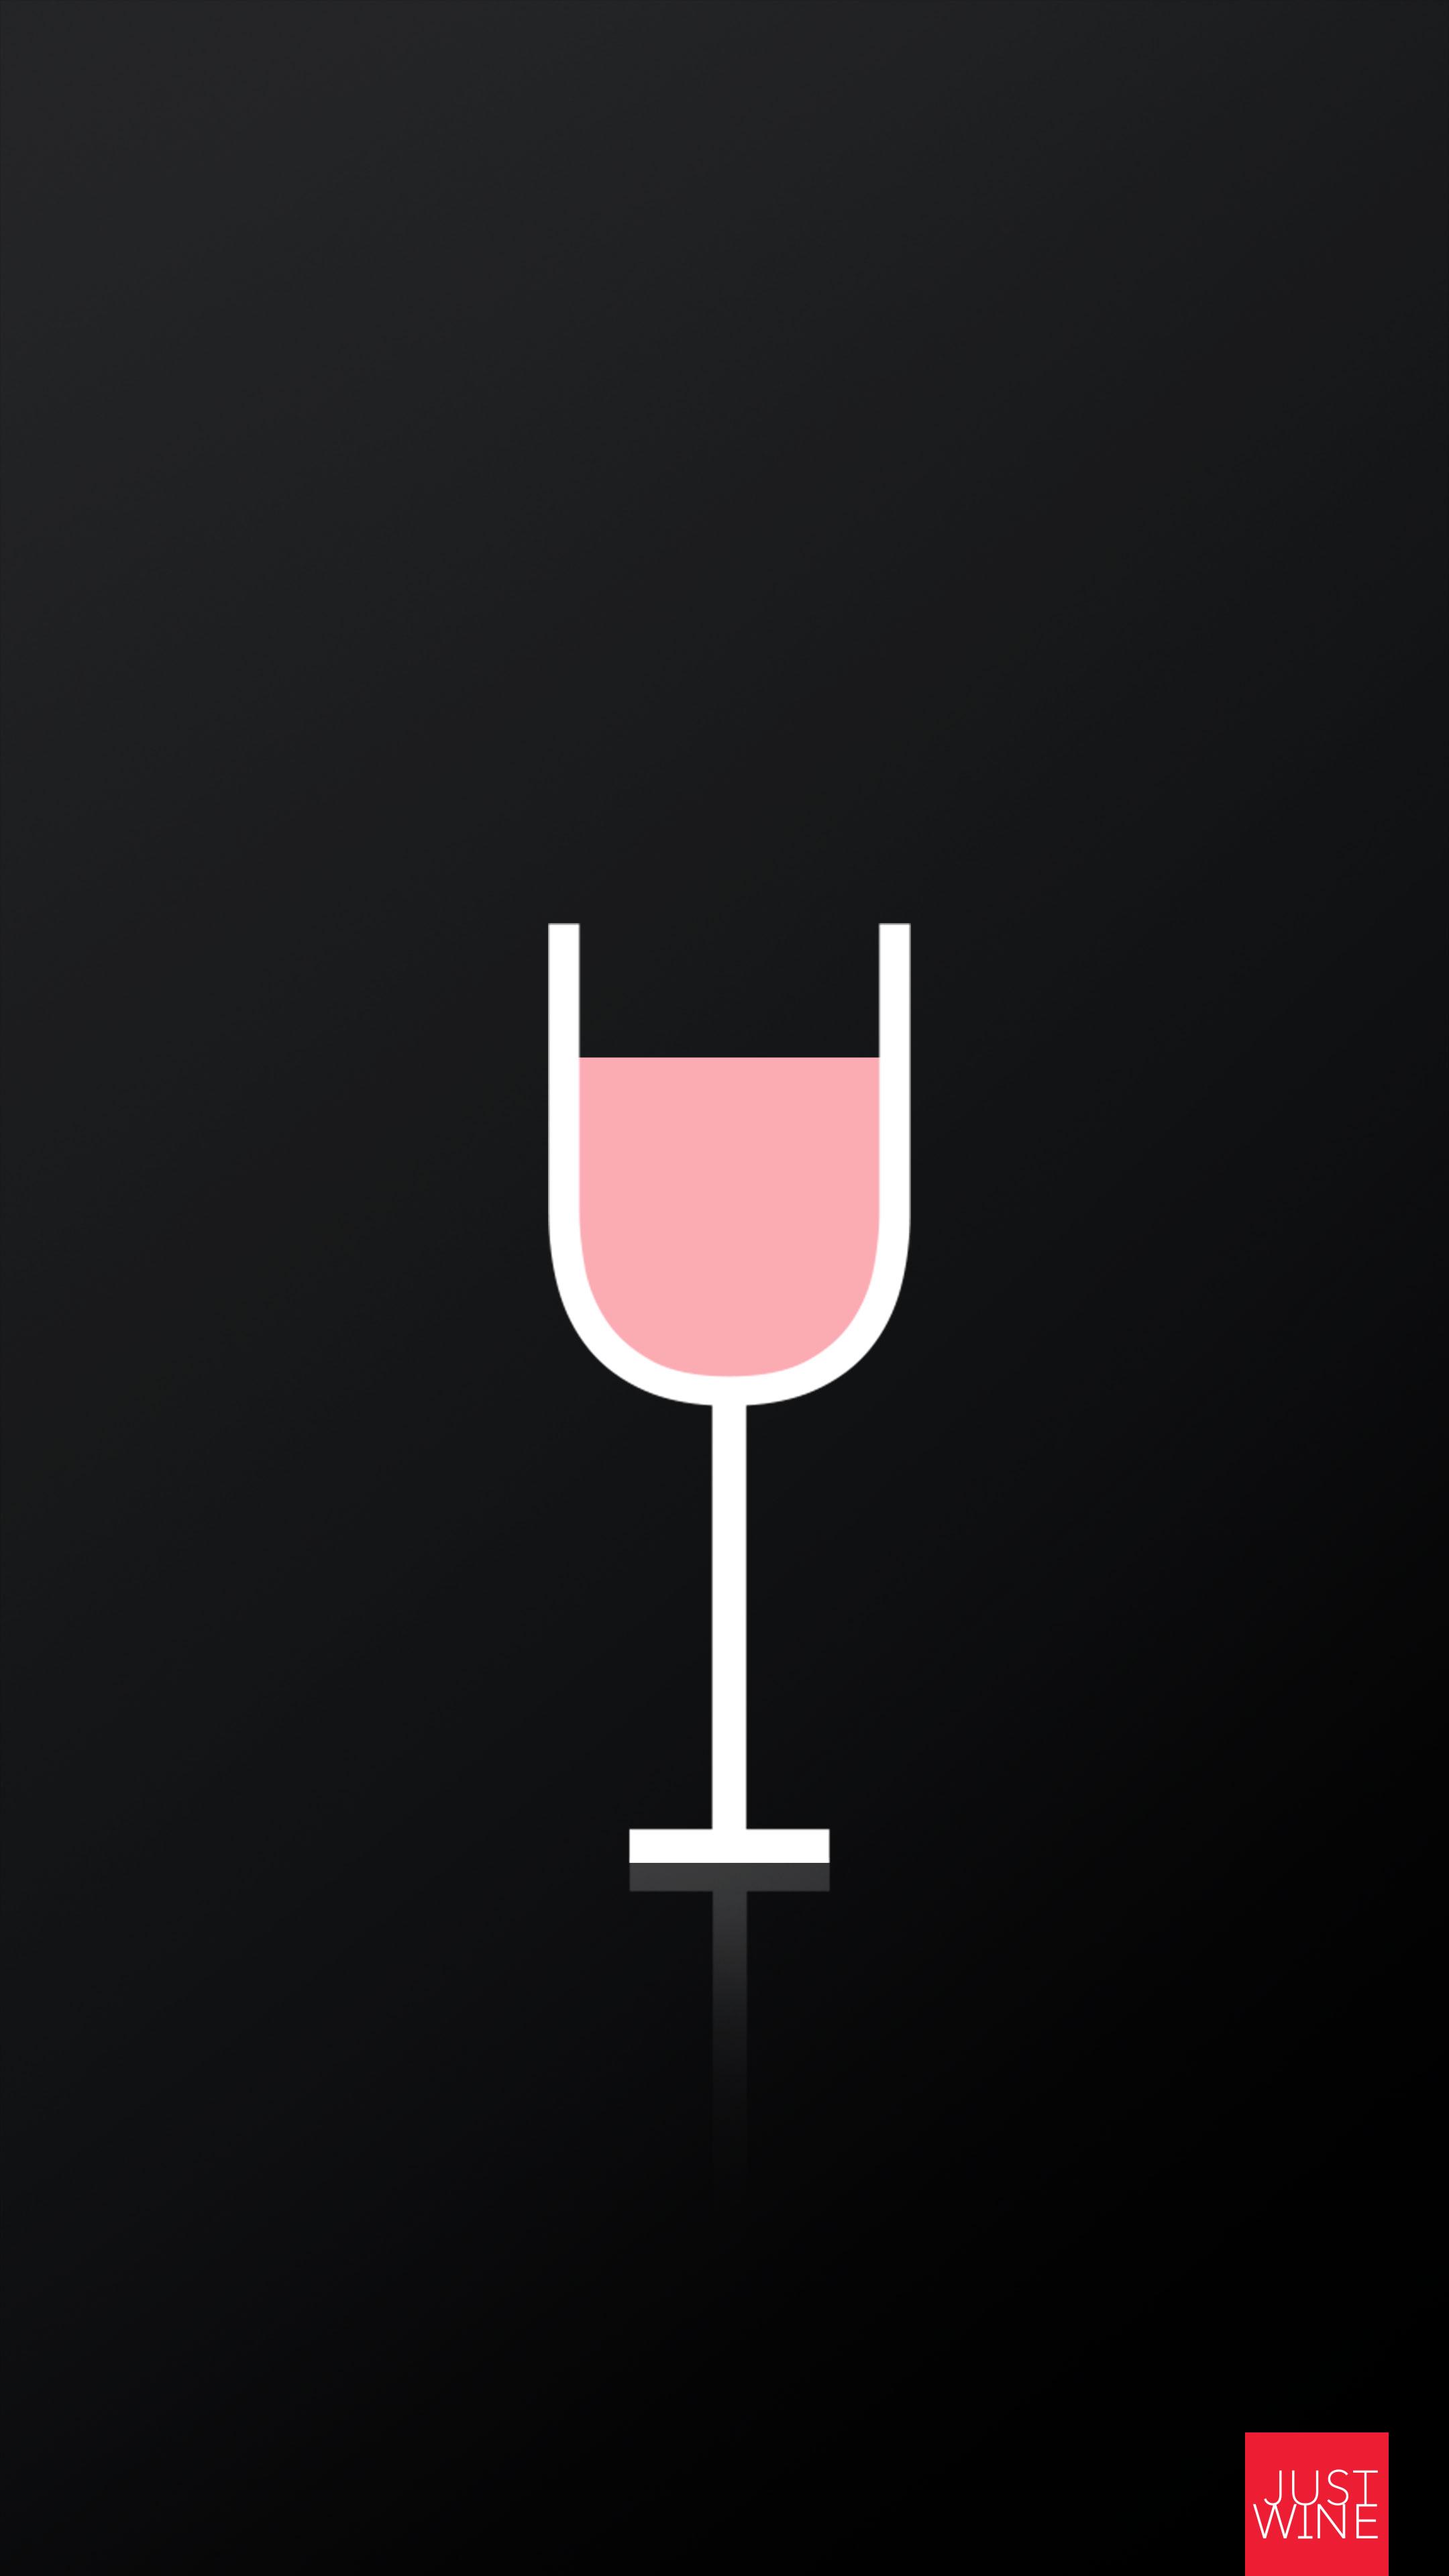 Wine Themed Background Wallpaper For IPhones A